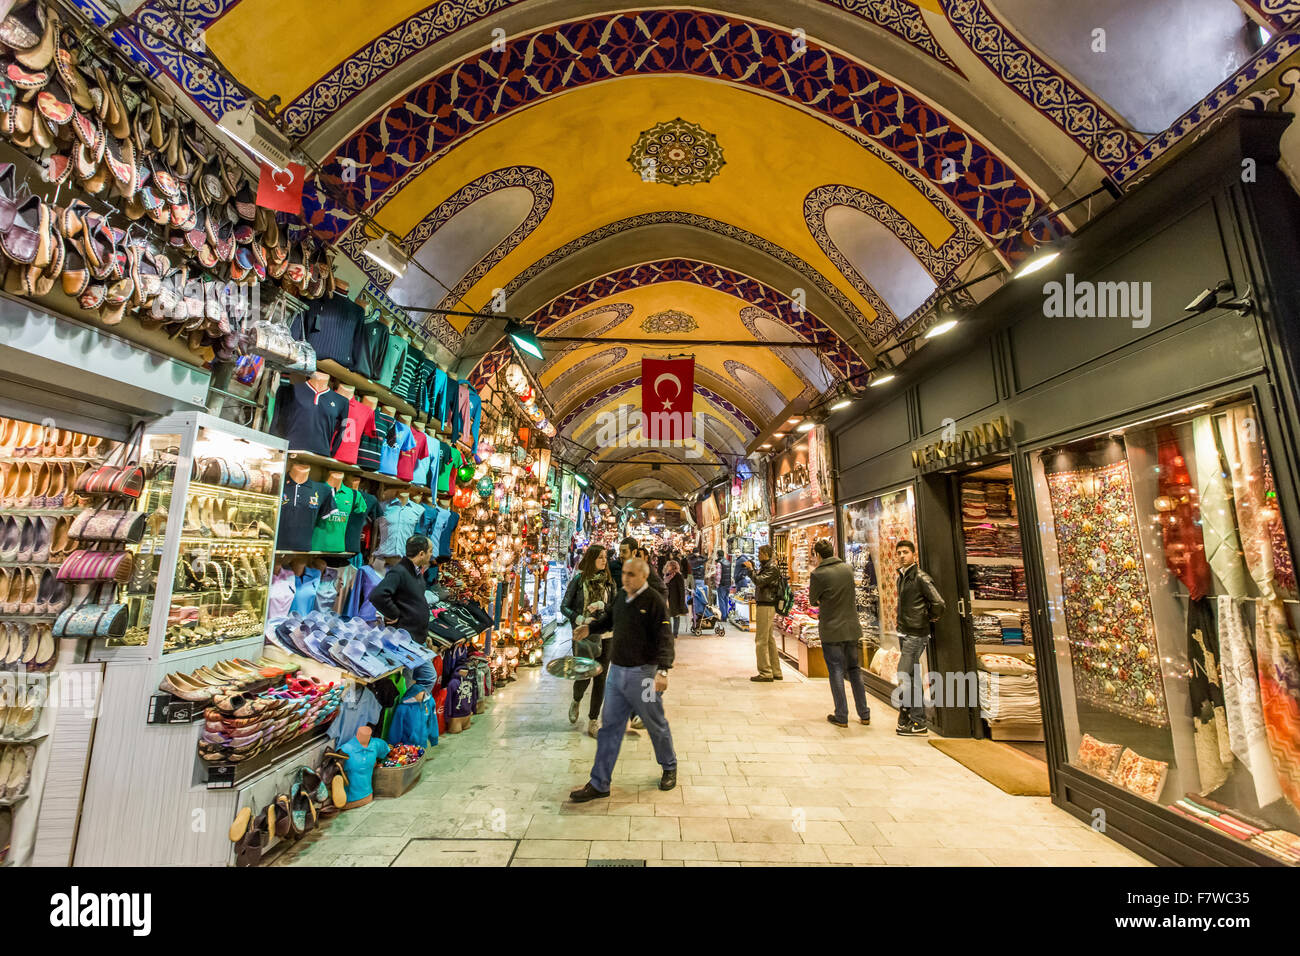 Shops Lined up in the Grand Bazaar, Istanbul, Turkey Stock Photo